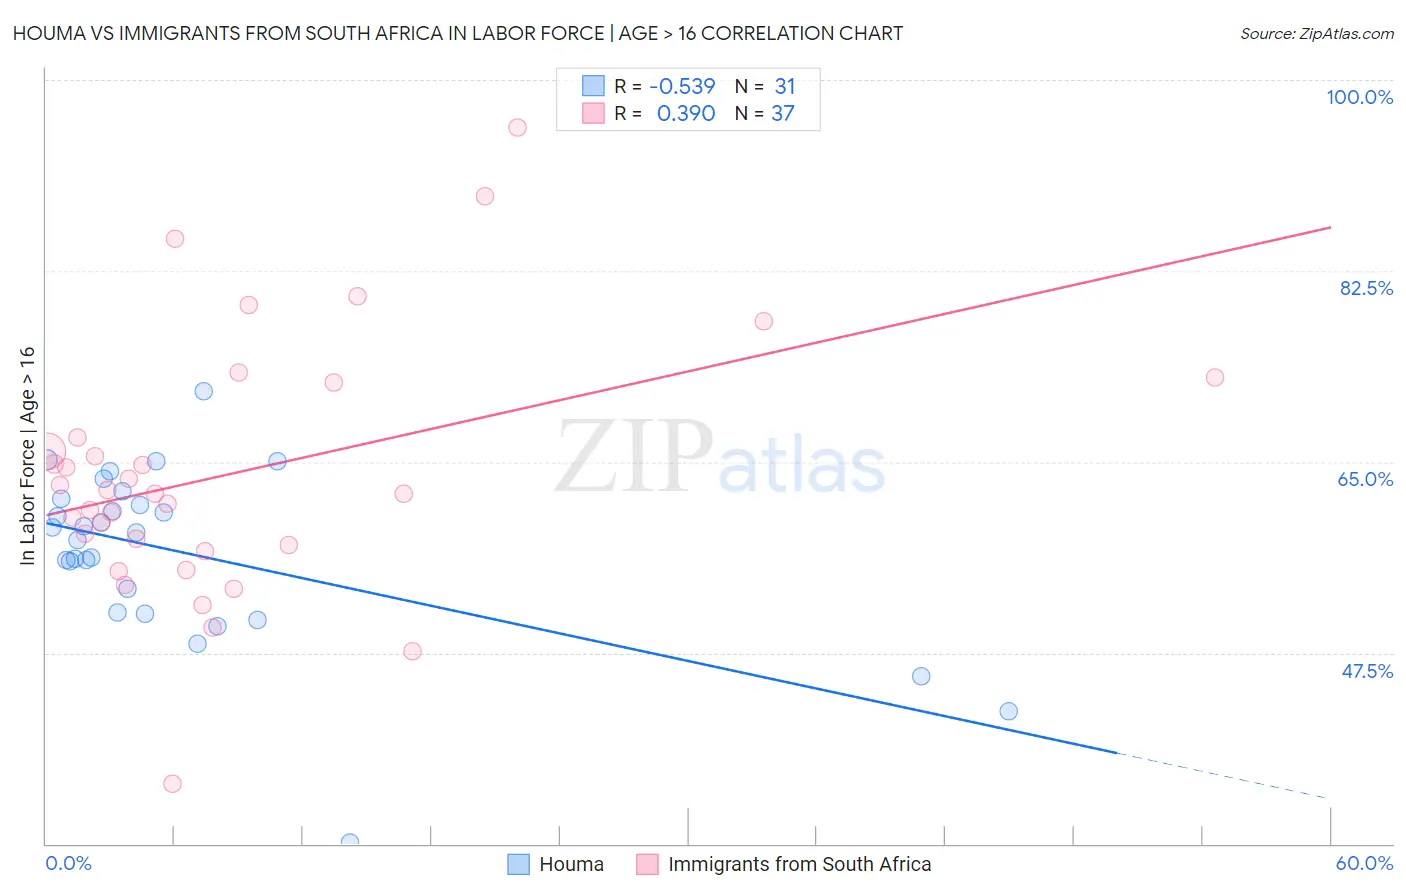 Houma vs Immigrants from South Africa In Labor Force | Age > 16